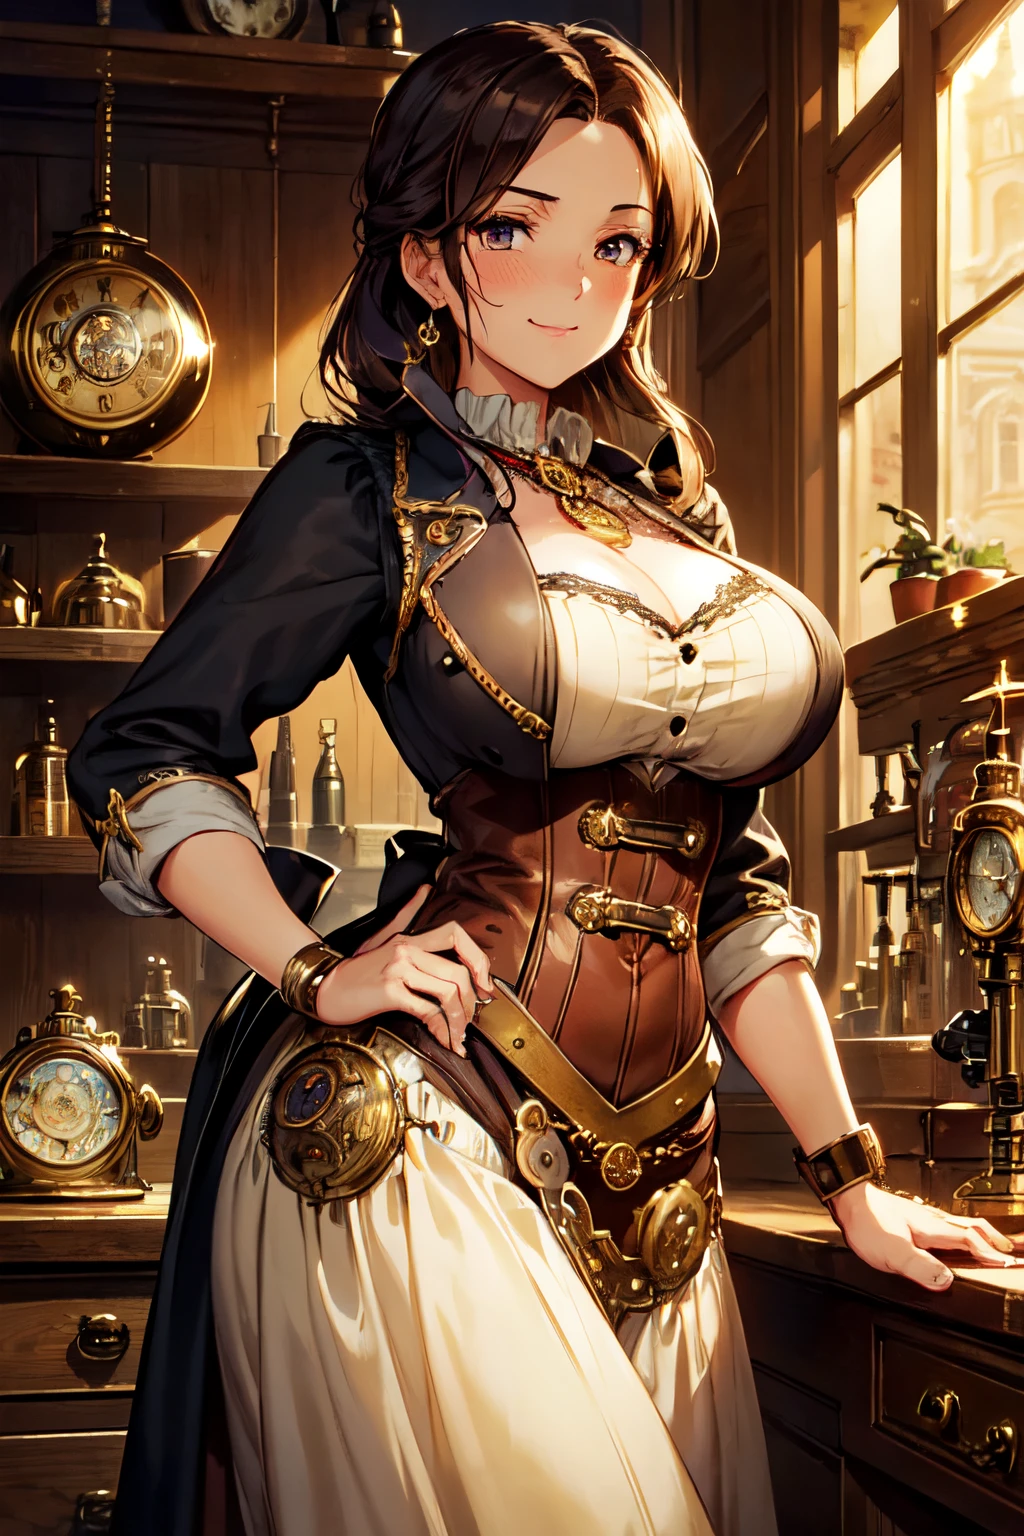 (High quality, High resolution, Fine details), Realistic, ((steampunk clockmaker woman)), meticulously crafted gears and machinery, ornate goggles and leather apron, elaborate Victorian-era attire, ((vintage timepieces and pocket watches)), antique workbench covered in tools, ((delicate clock hands and intricate clock faces)), dimly lit workshop filled with steam and smoke, rich palette of sepia tones and warm hues, solo, women, sparkling eyes, (Detailed eyes), smile, blush, Sweat, Oily skin, shallow depth of field